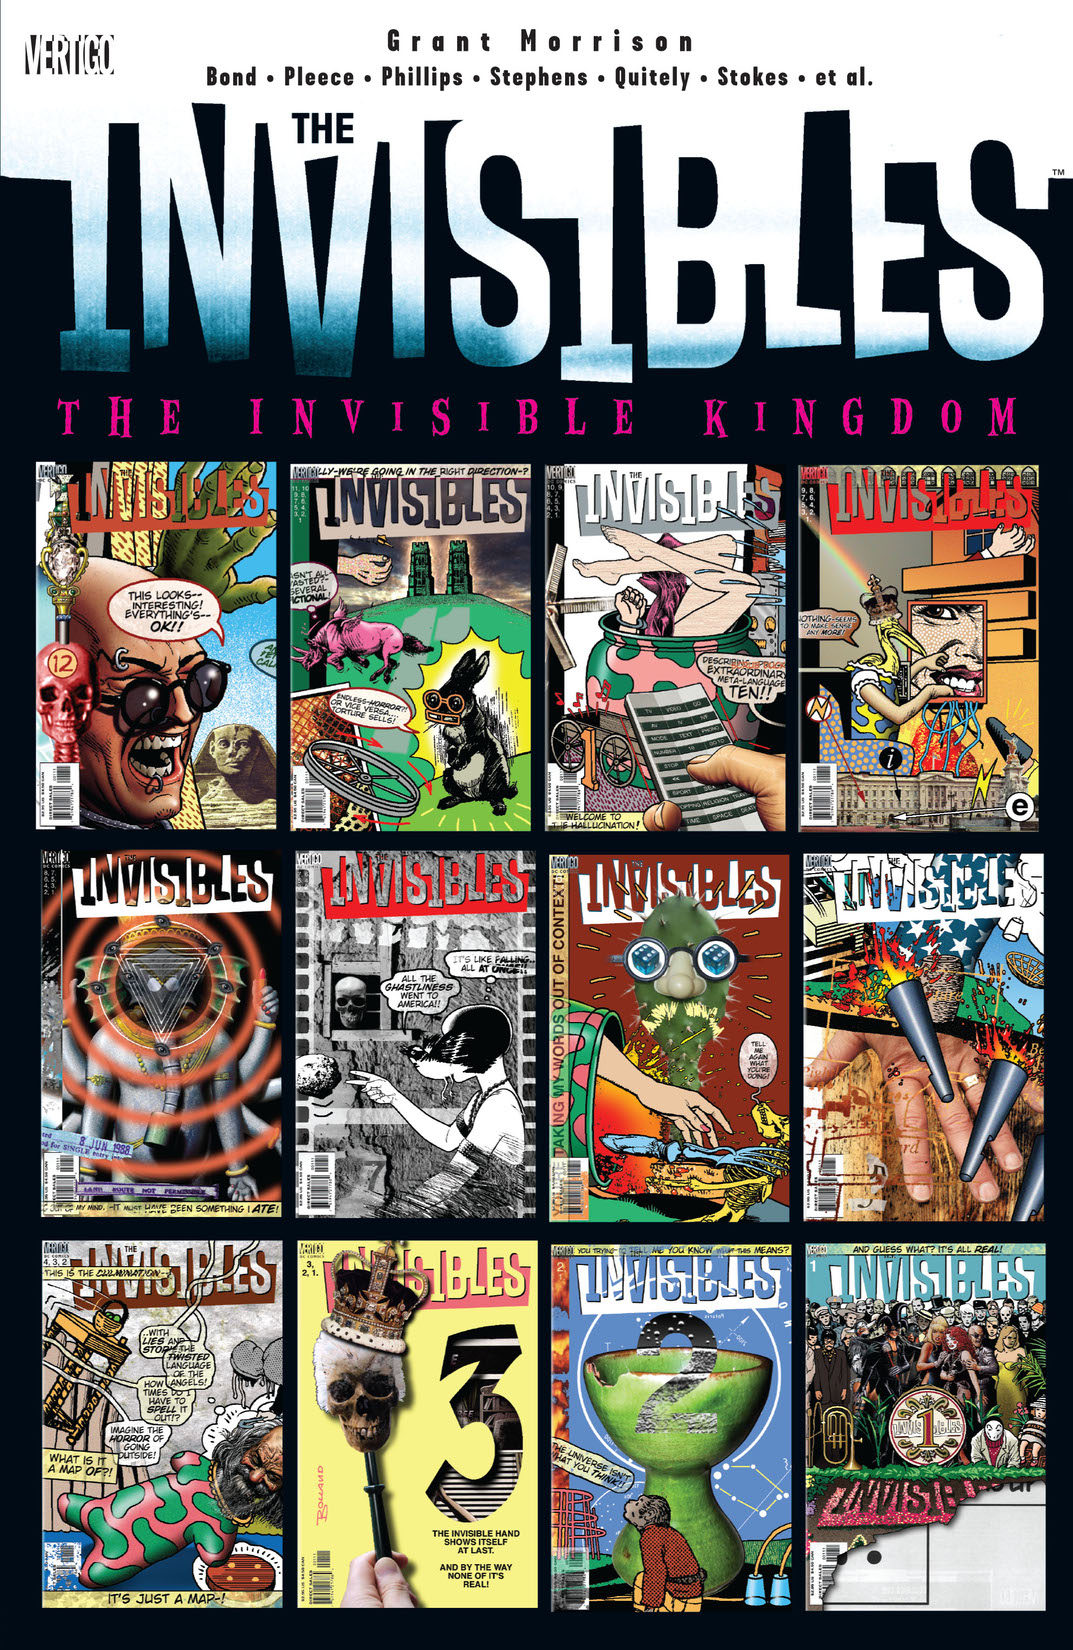 The Invisibles Vol. 7: The Invisible Kingdom preview images